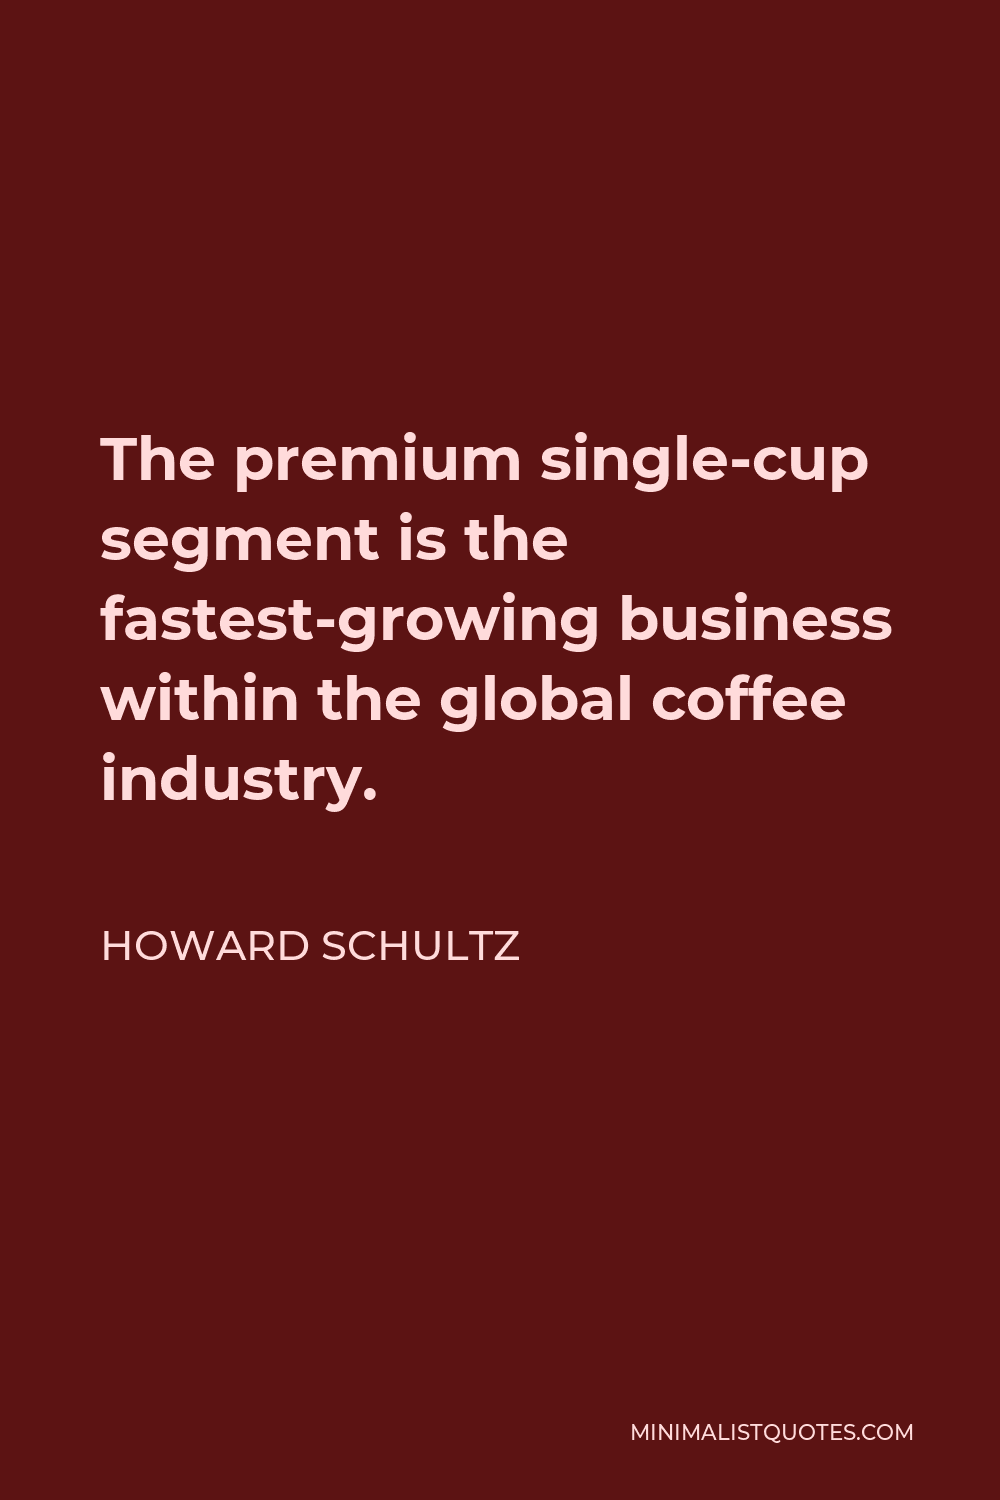 Howard Schultz Quote - The premium single-cup segment is the fastest-growing business within the global coffee industry.